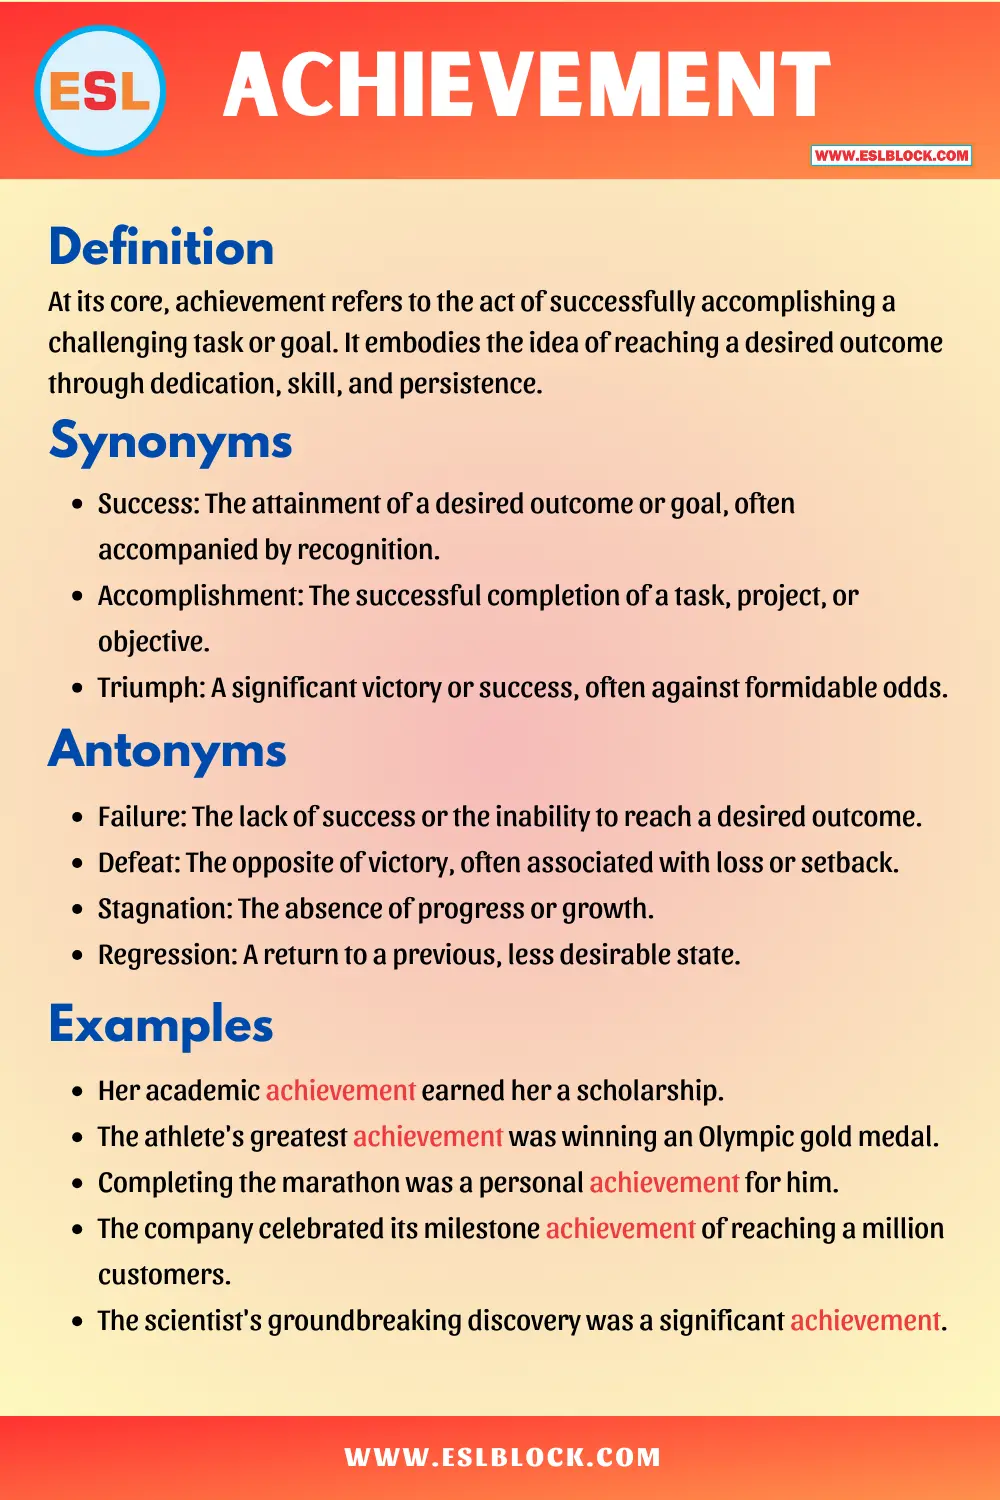 Achievement Synonyms, Antonyms, Meaning, Definition